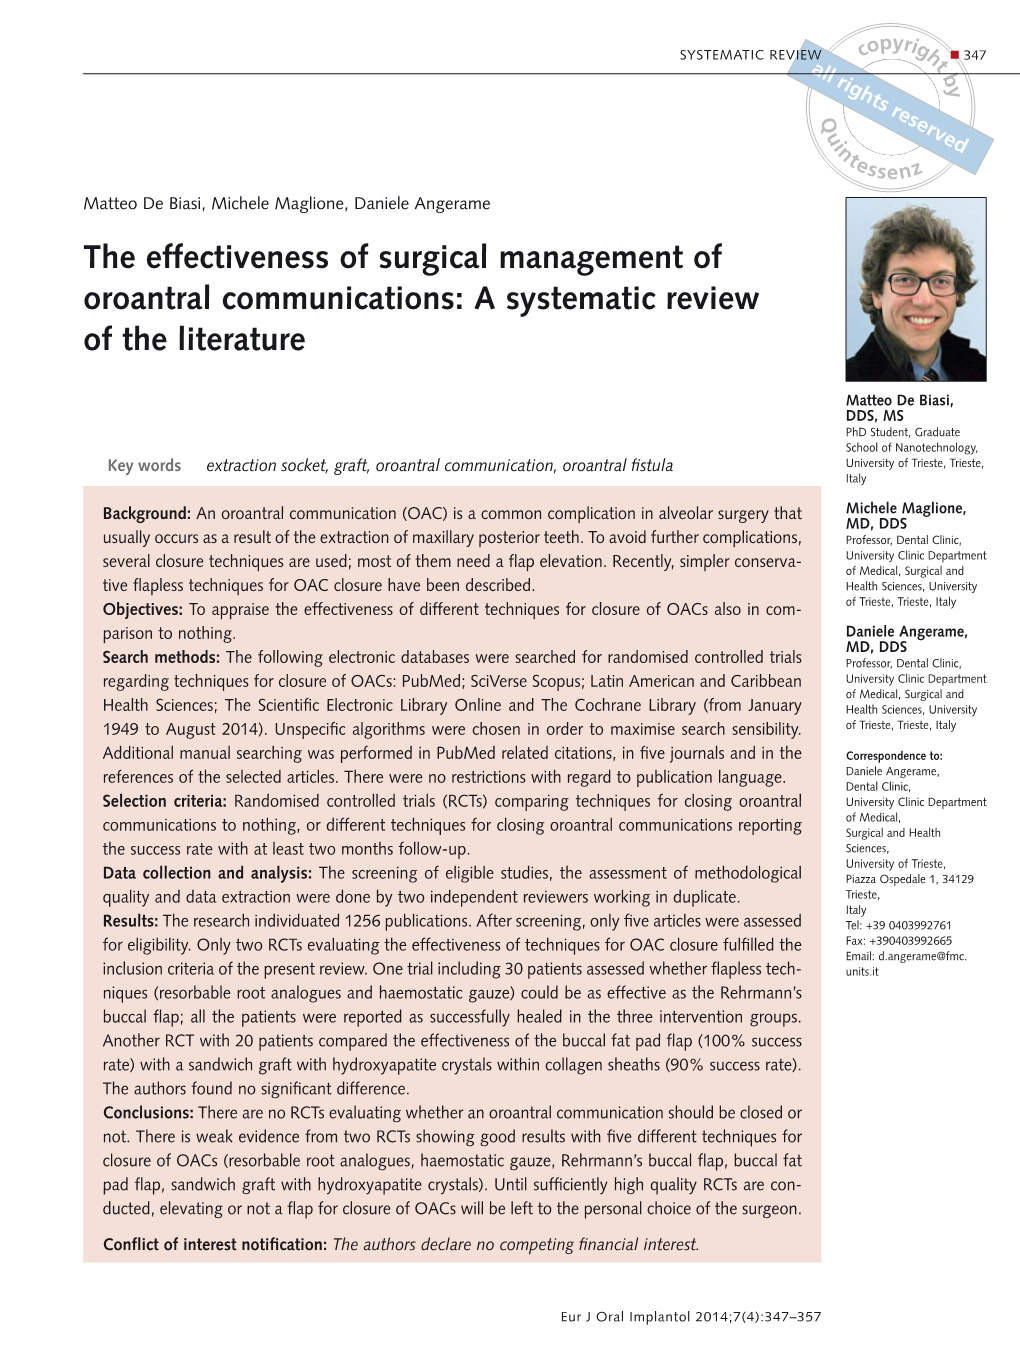 The Effectiveness of Surgical Management of Oroantral Communications: a Systematic Review of the Literature